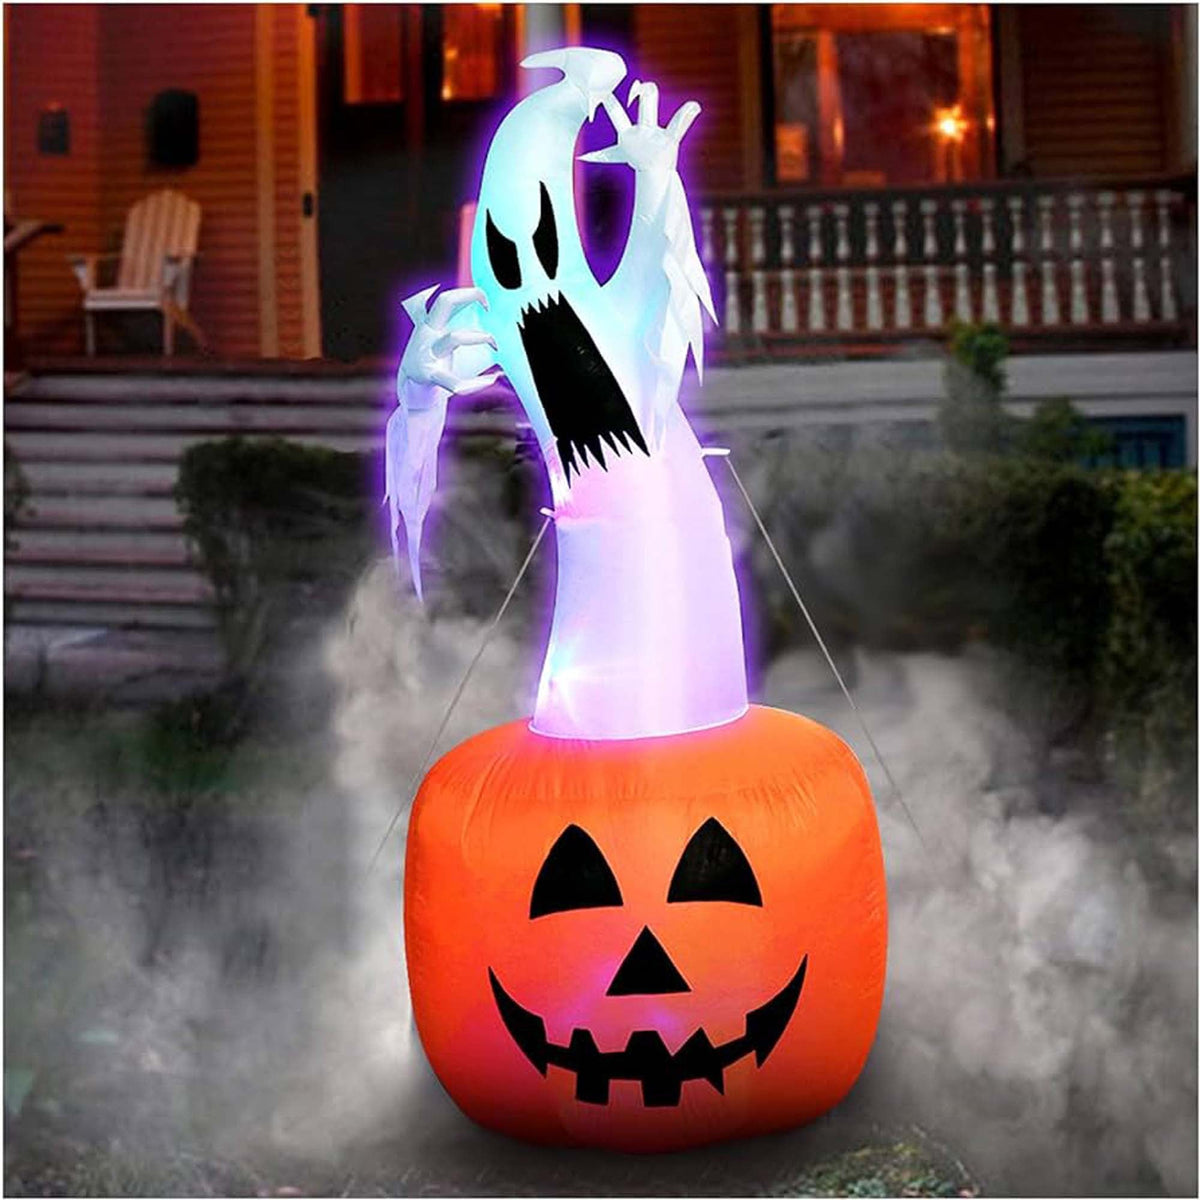 DANSON DECOR Halloween Inflatable Light-Up Ghost In Pumpkin Decoration, 72 Inches, 1 Count